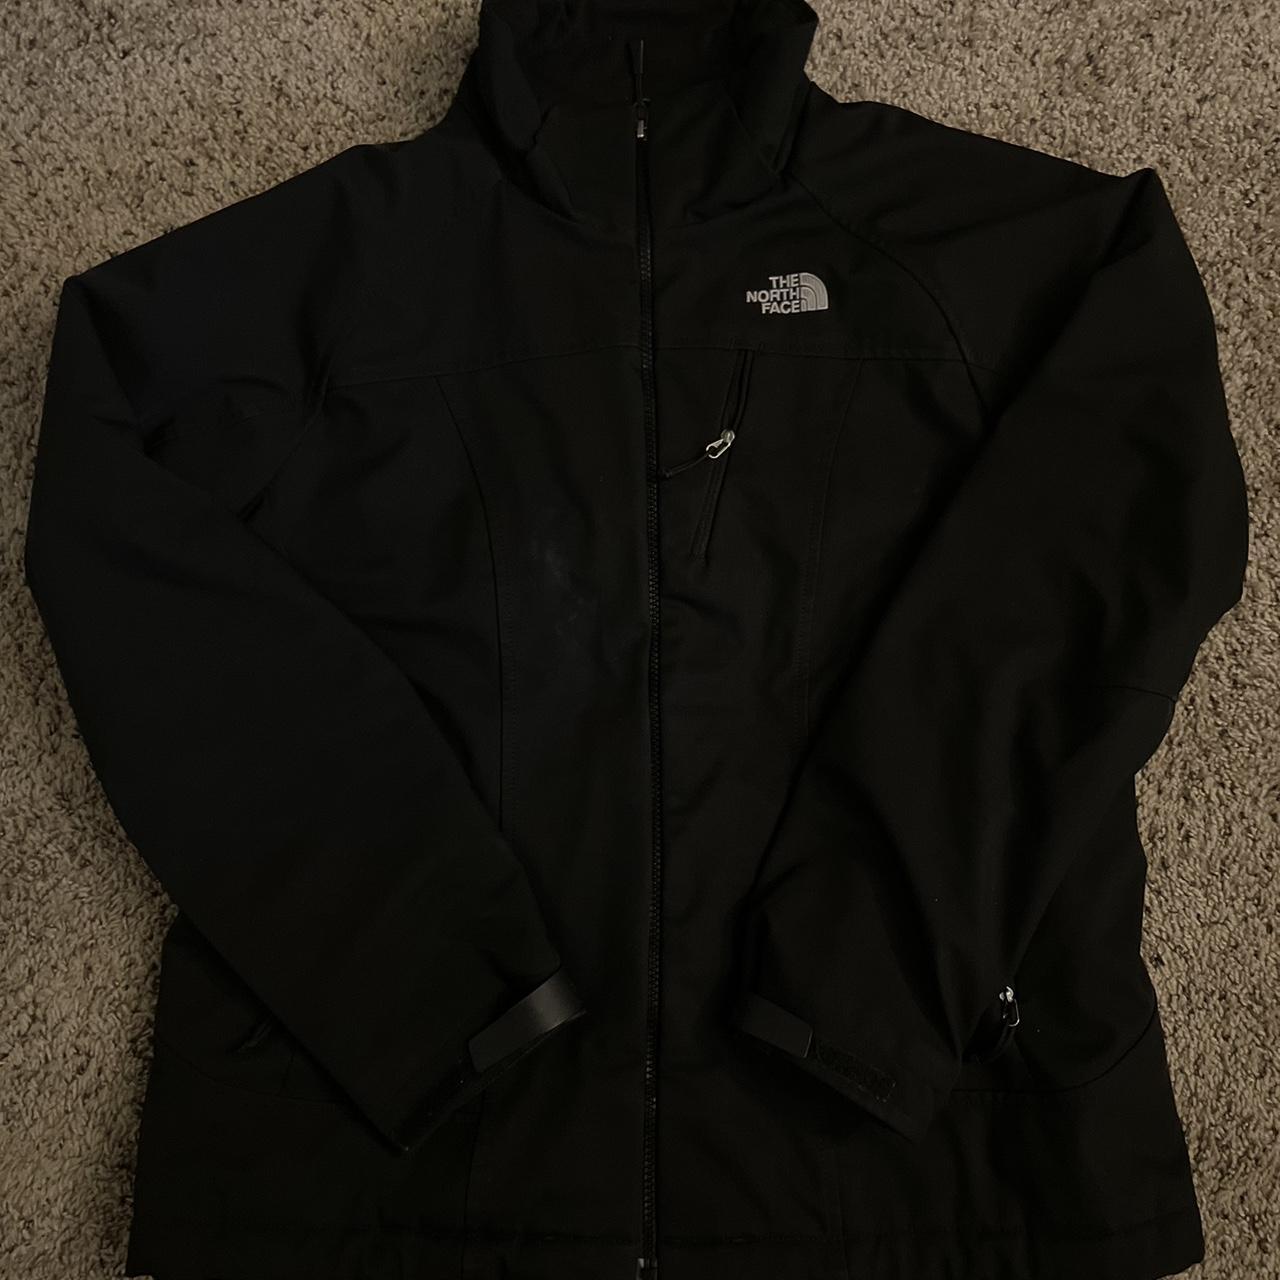 The North Face Women's Black Jacket